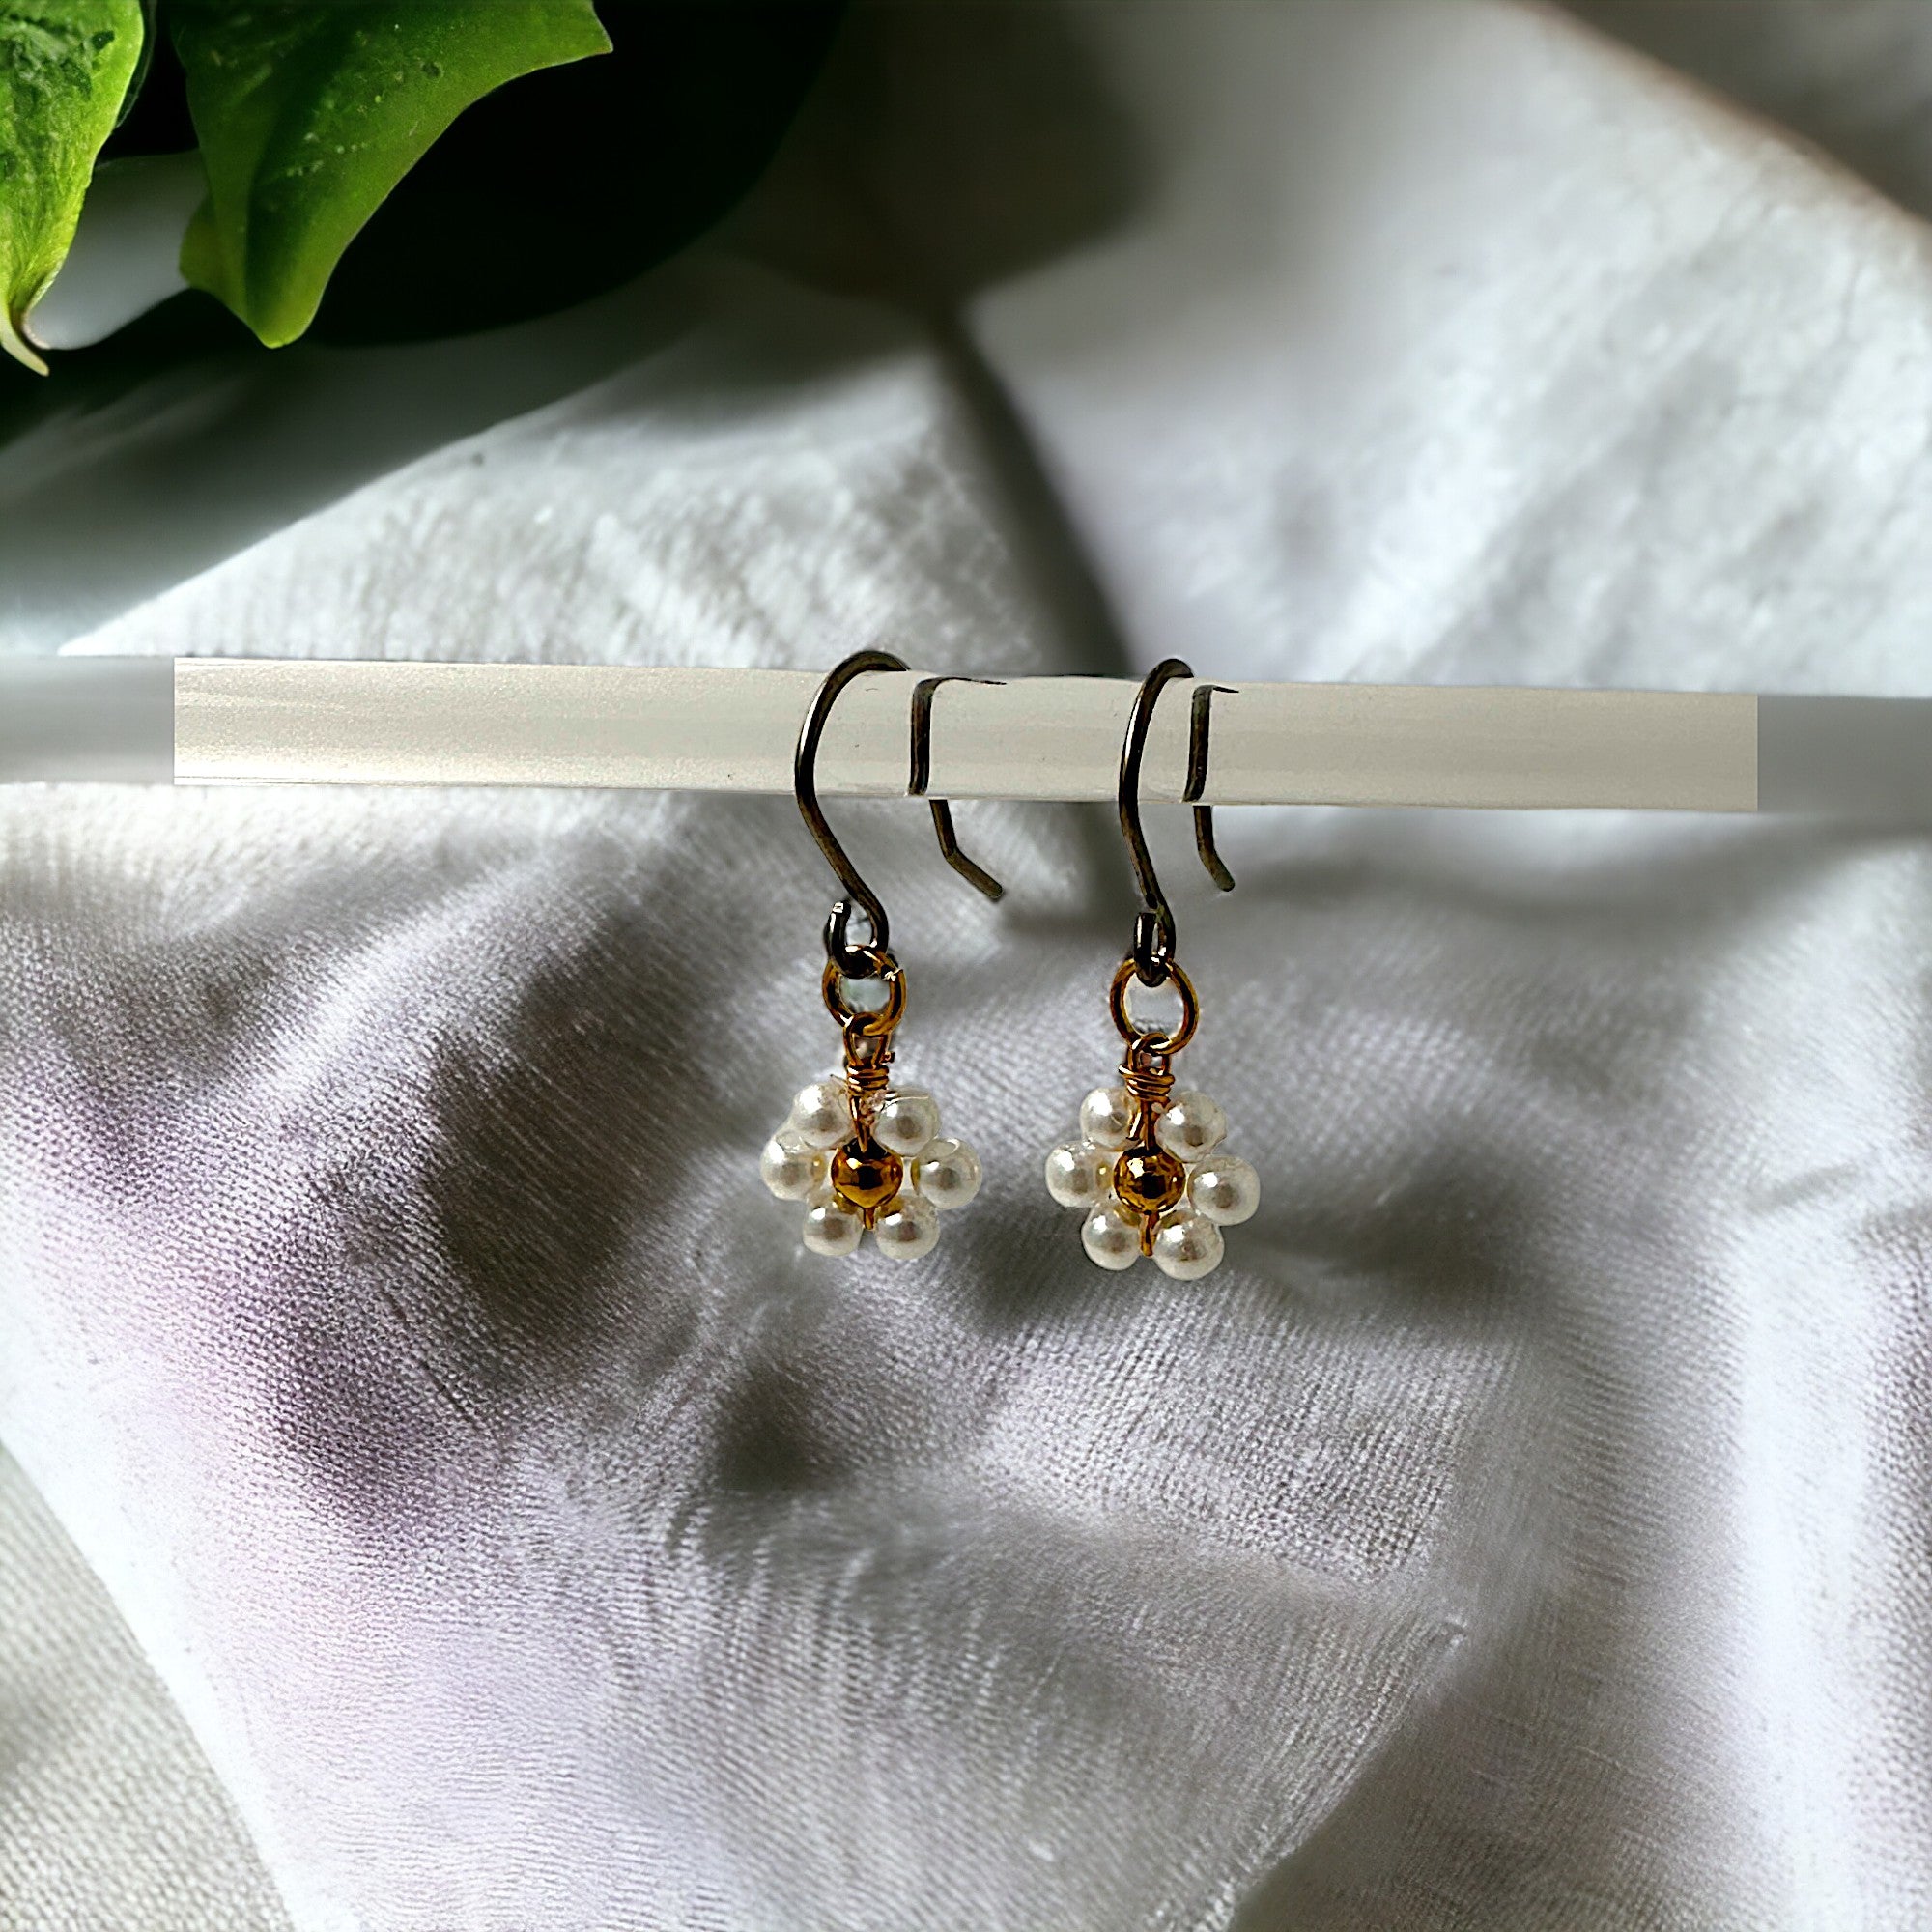 Mini pearl flower cluster earrings with a titanium hook on a white and green background